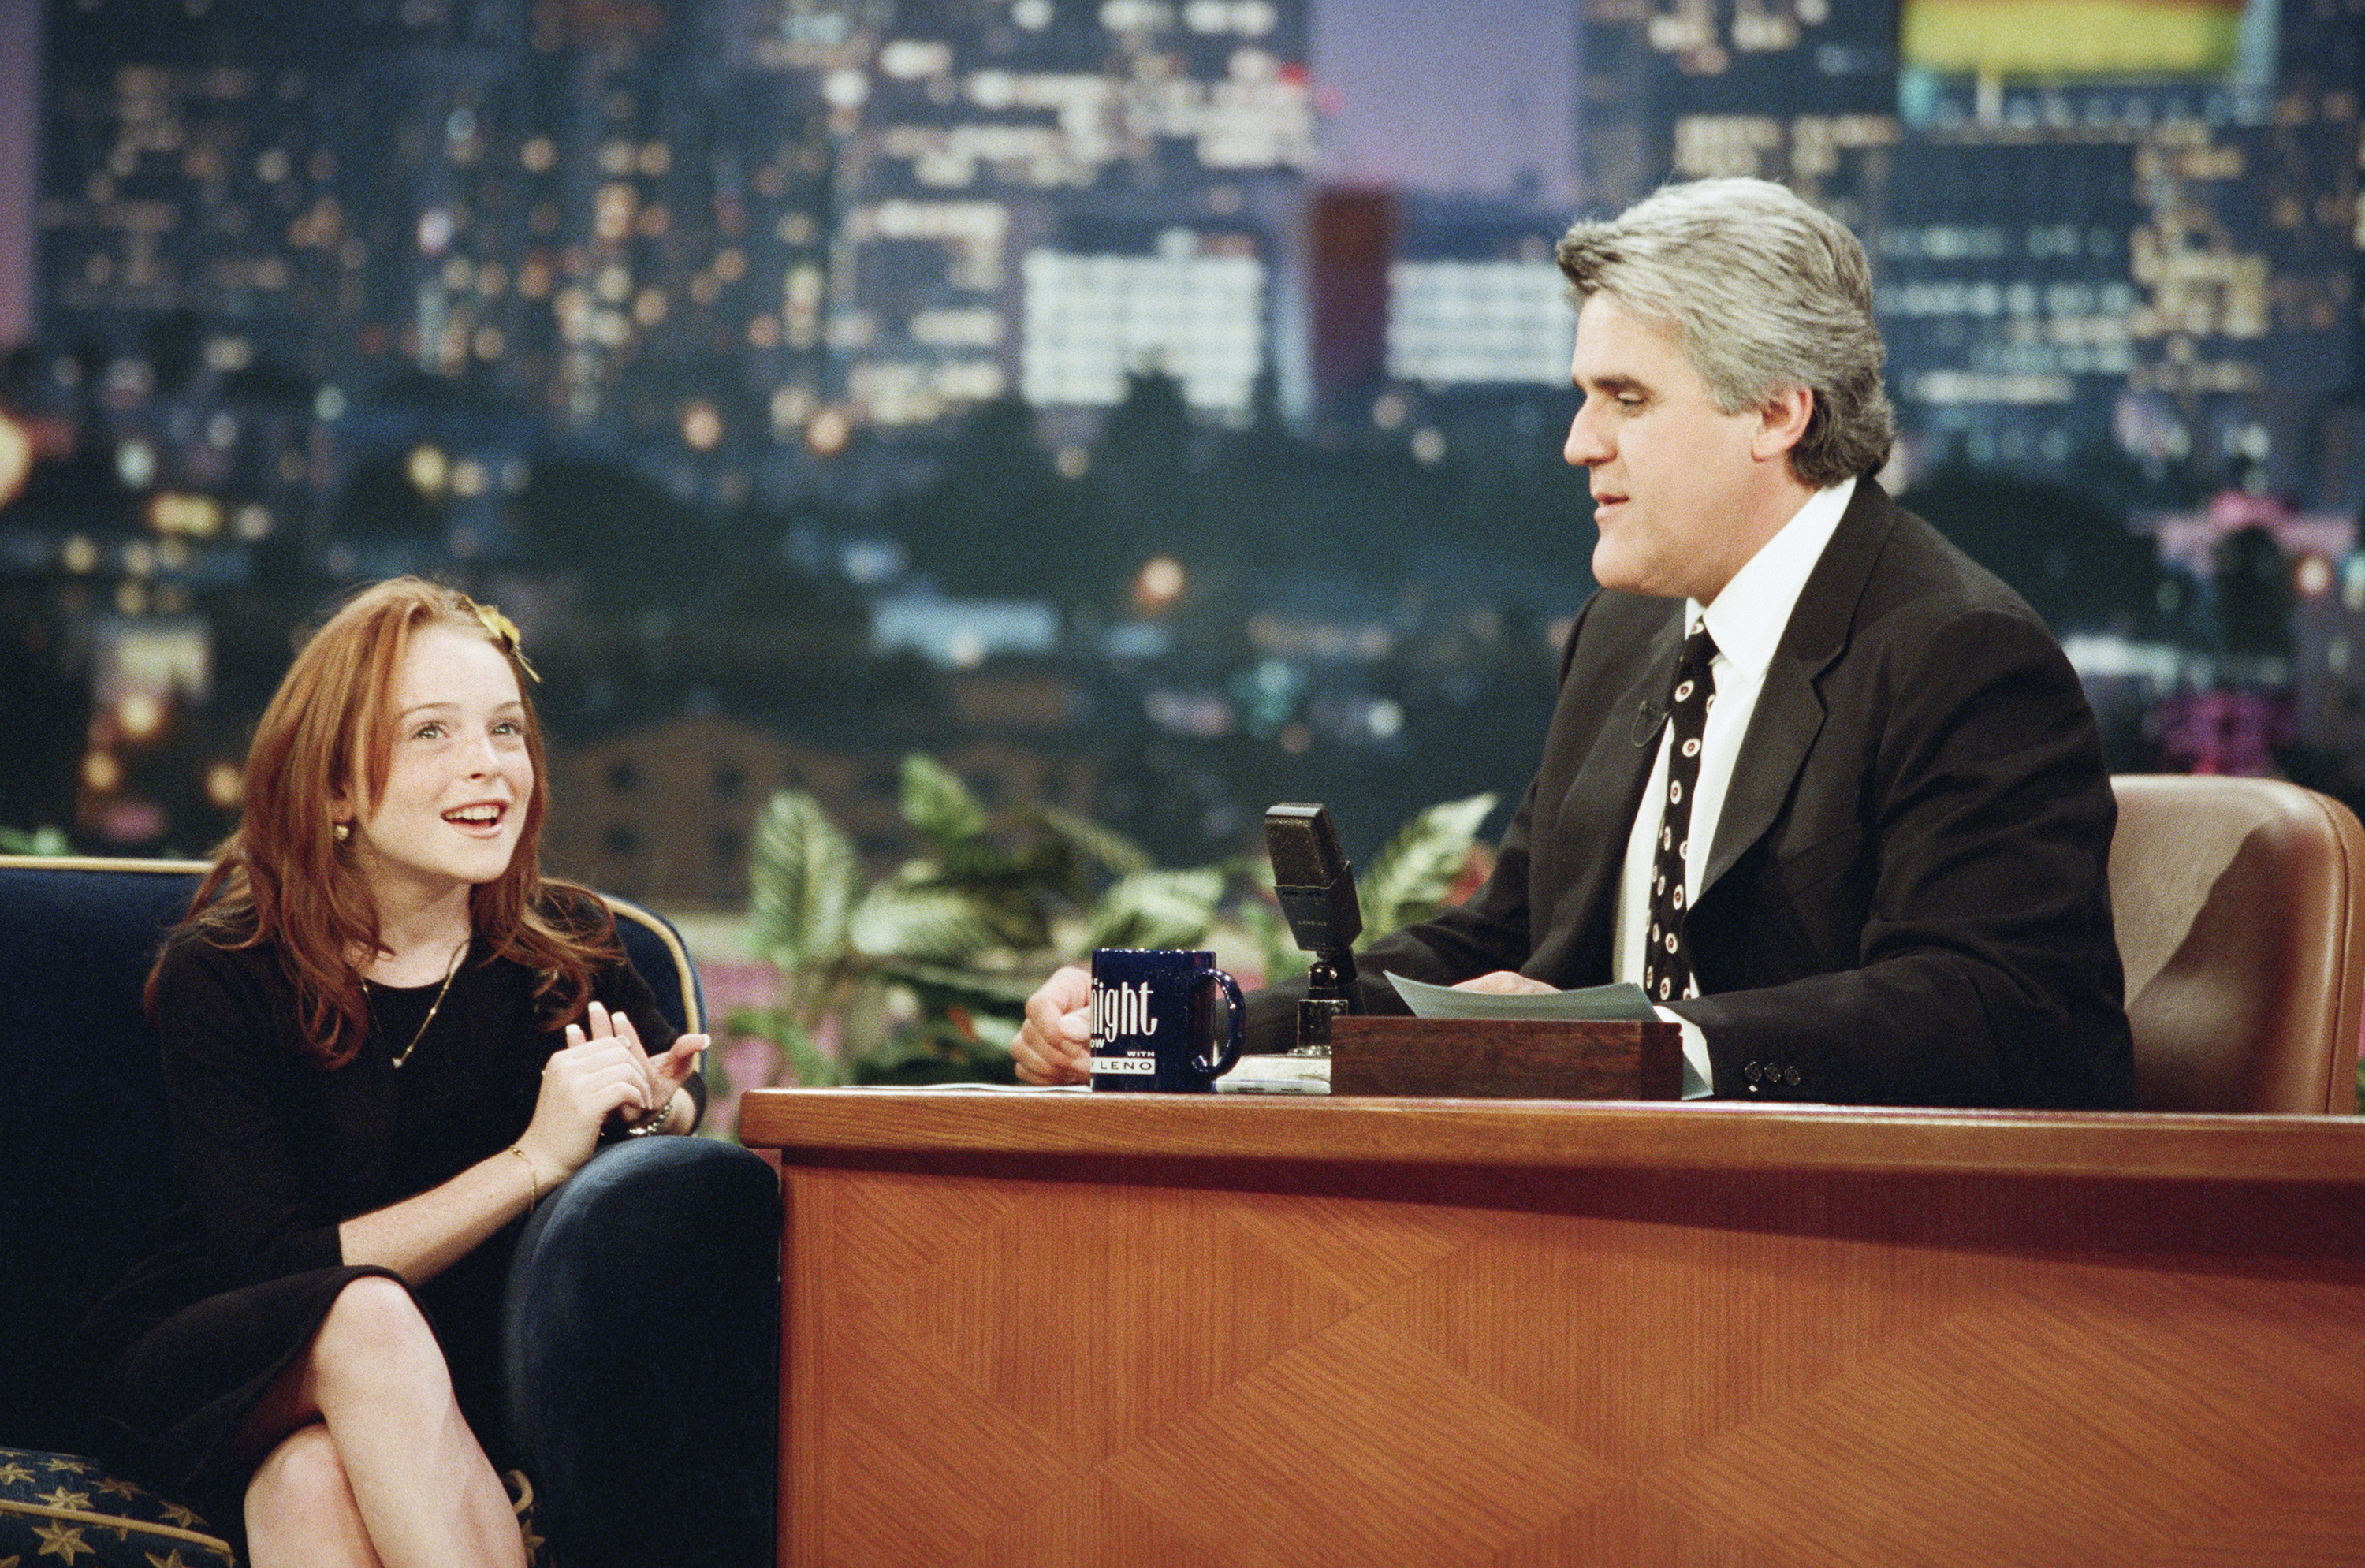 Lindsay Lohan on "The Tonight Show with Jay Leno" with an airdate of July 21, 1998 | Source: Getty Images